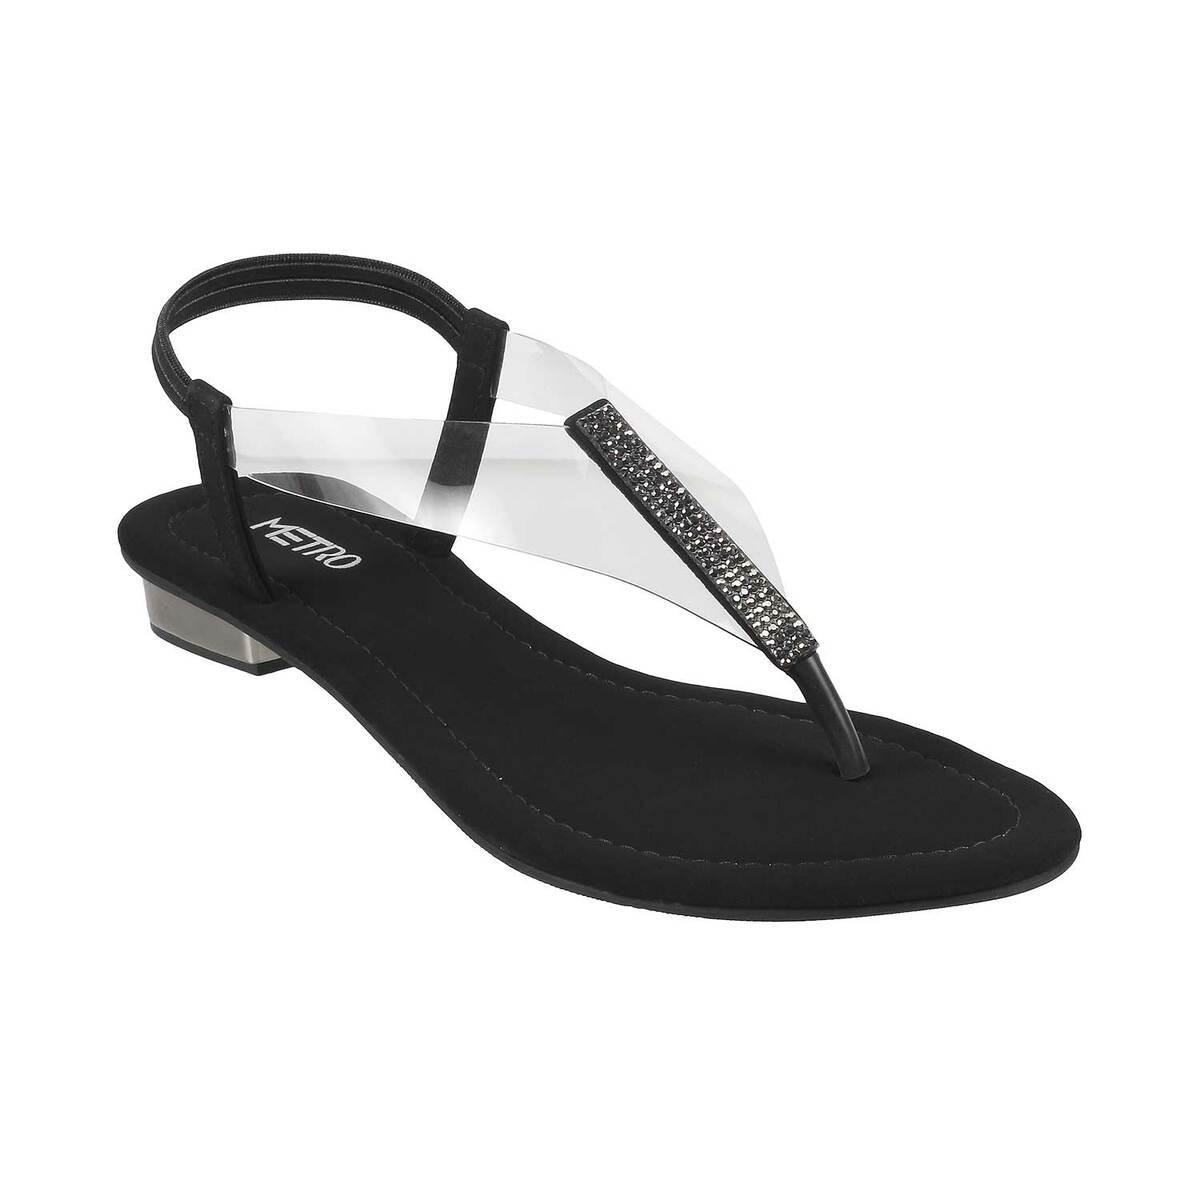 Buy Metro Women's Black Comfort Sandals from top Brands at Best Prices  Online in India | Tata CLiQ